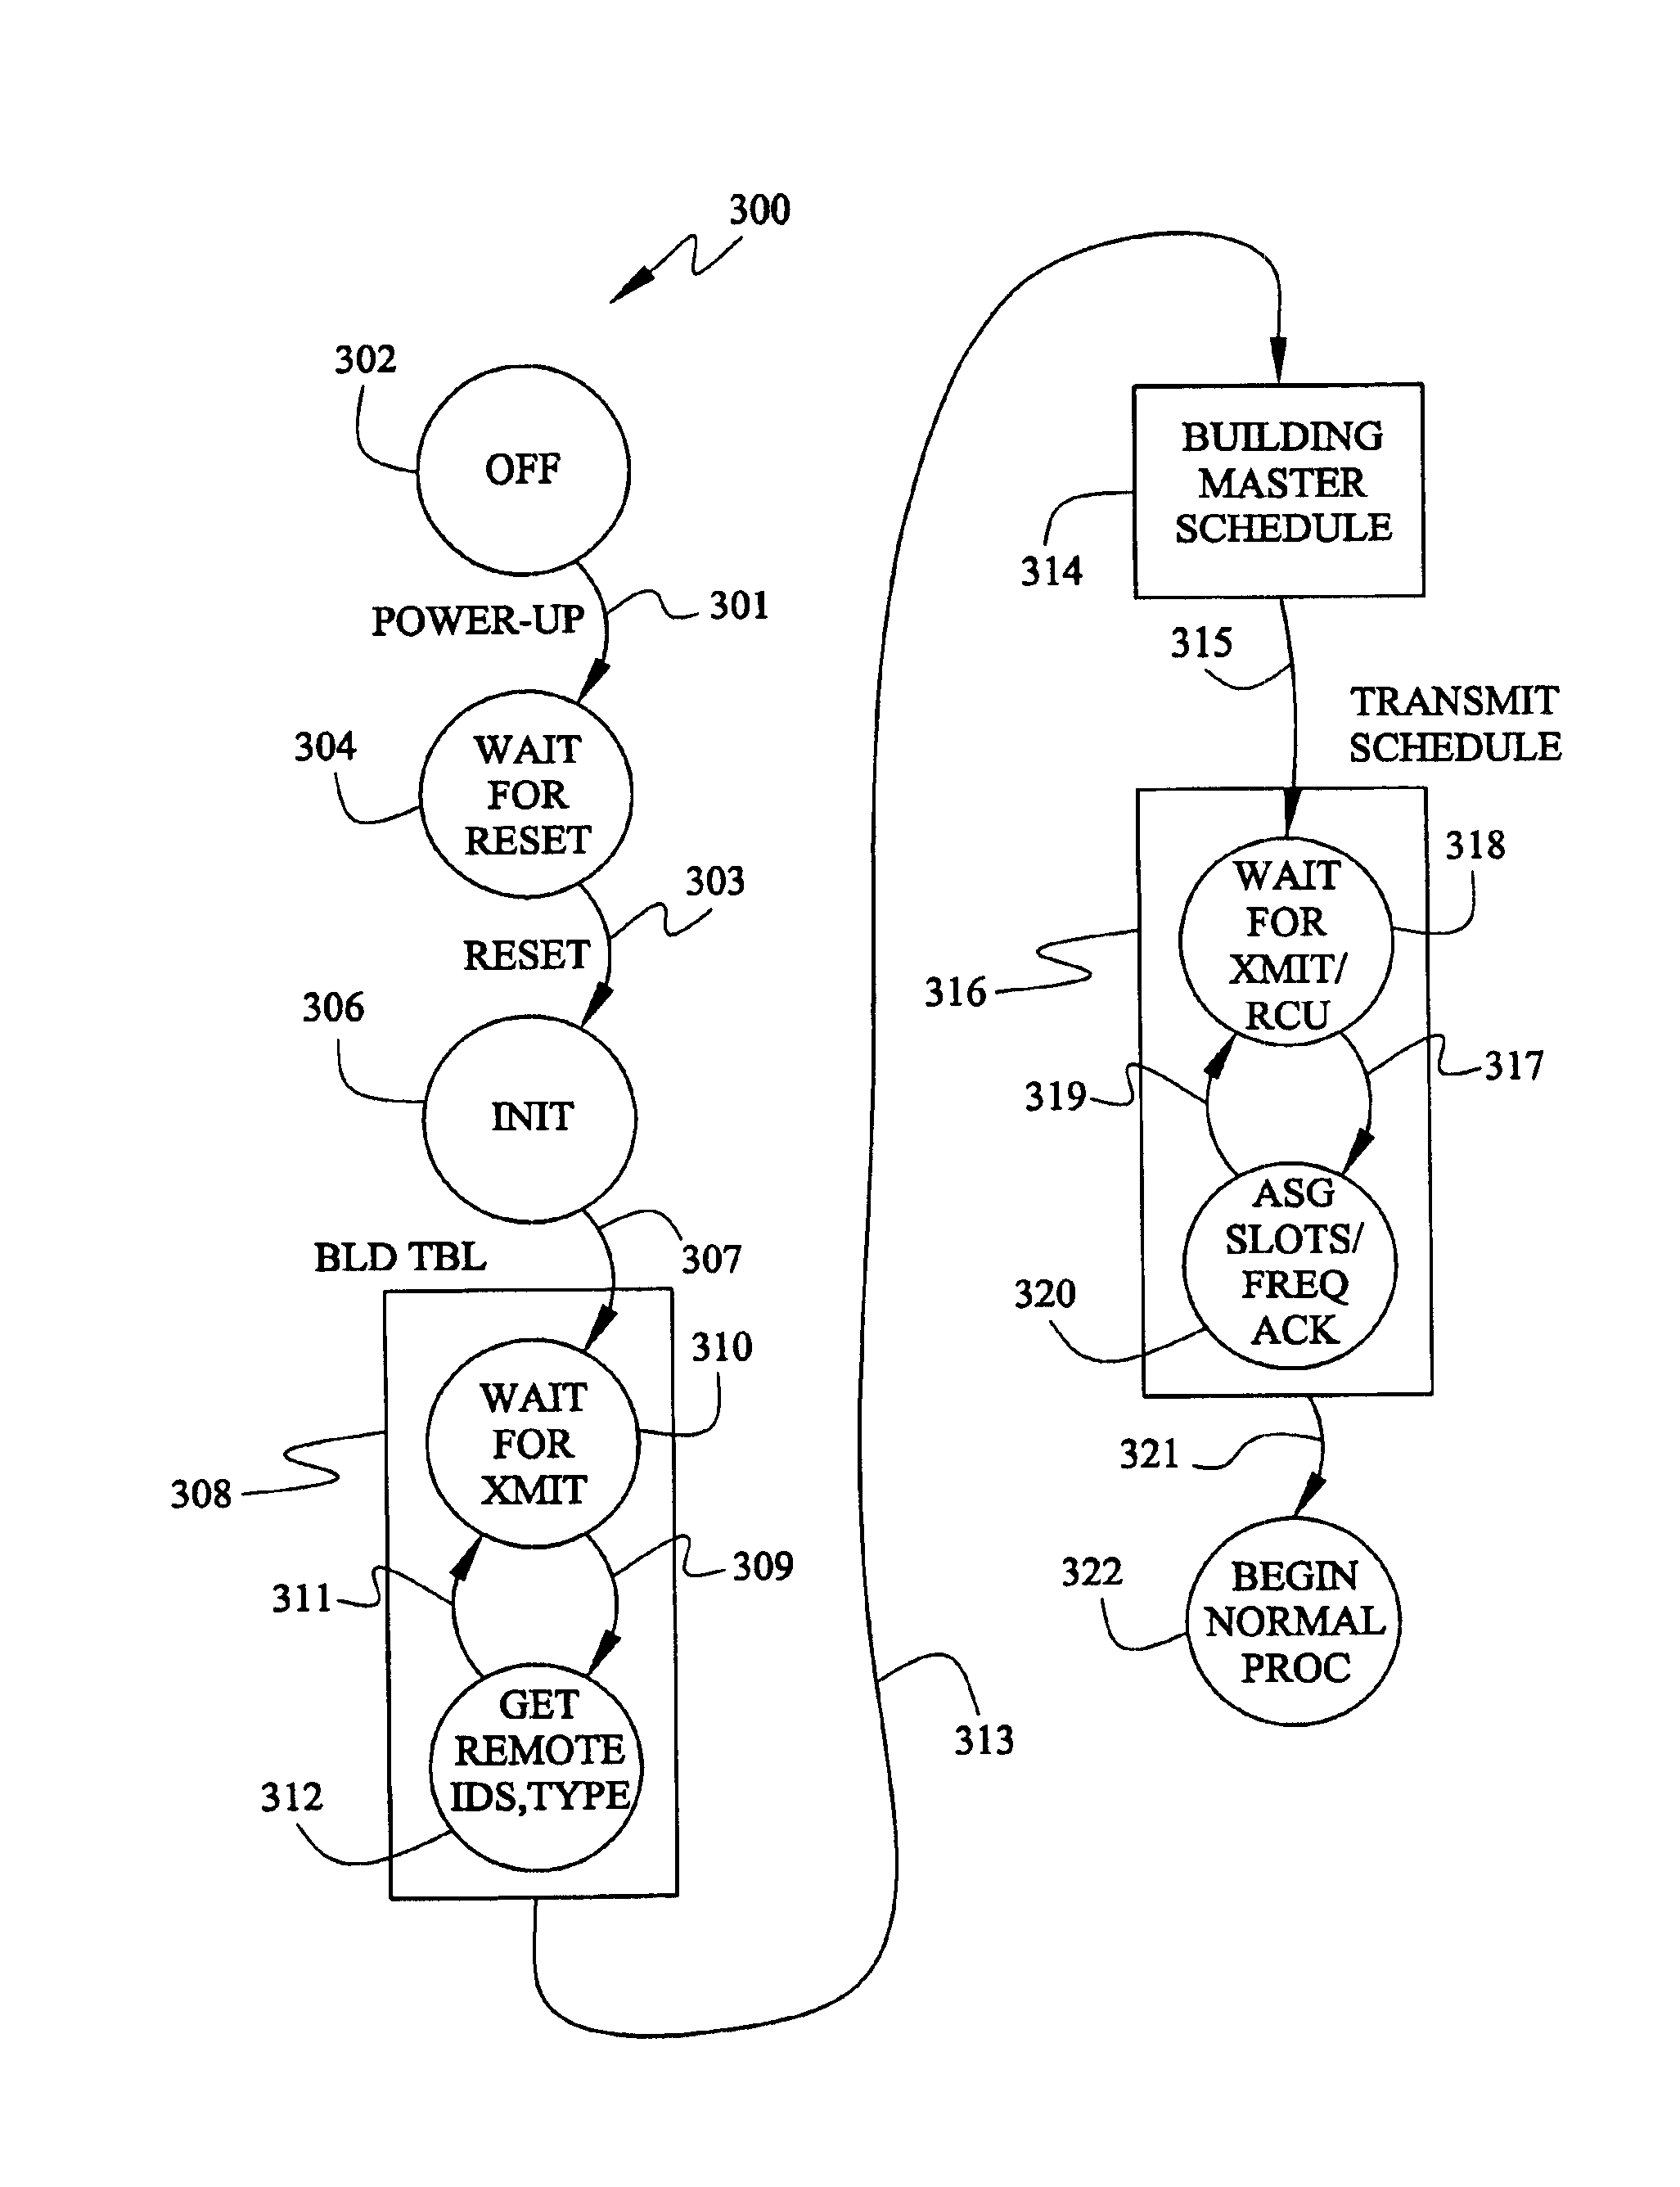 Wireless control network with scheduled time slots